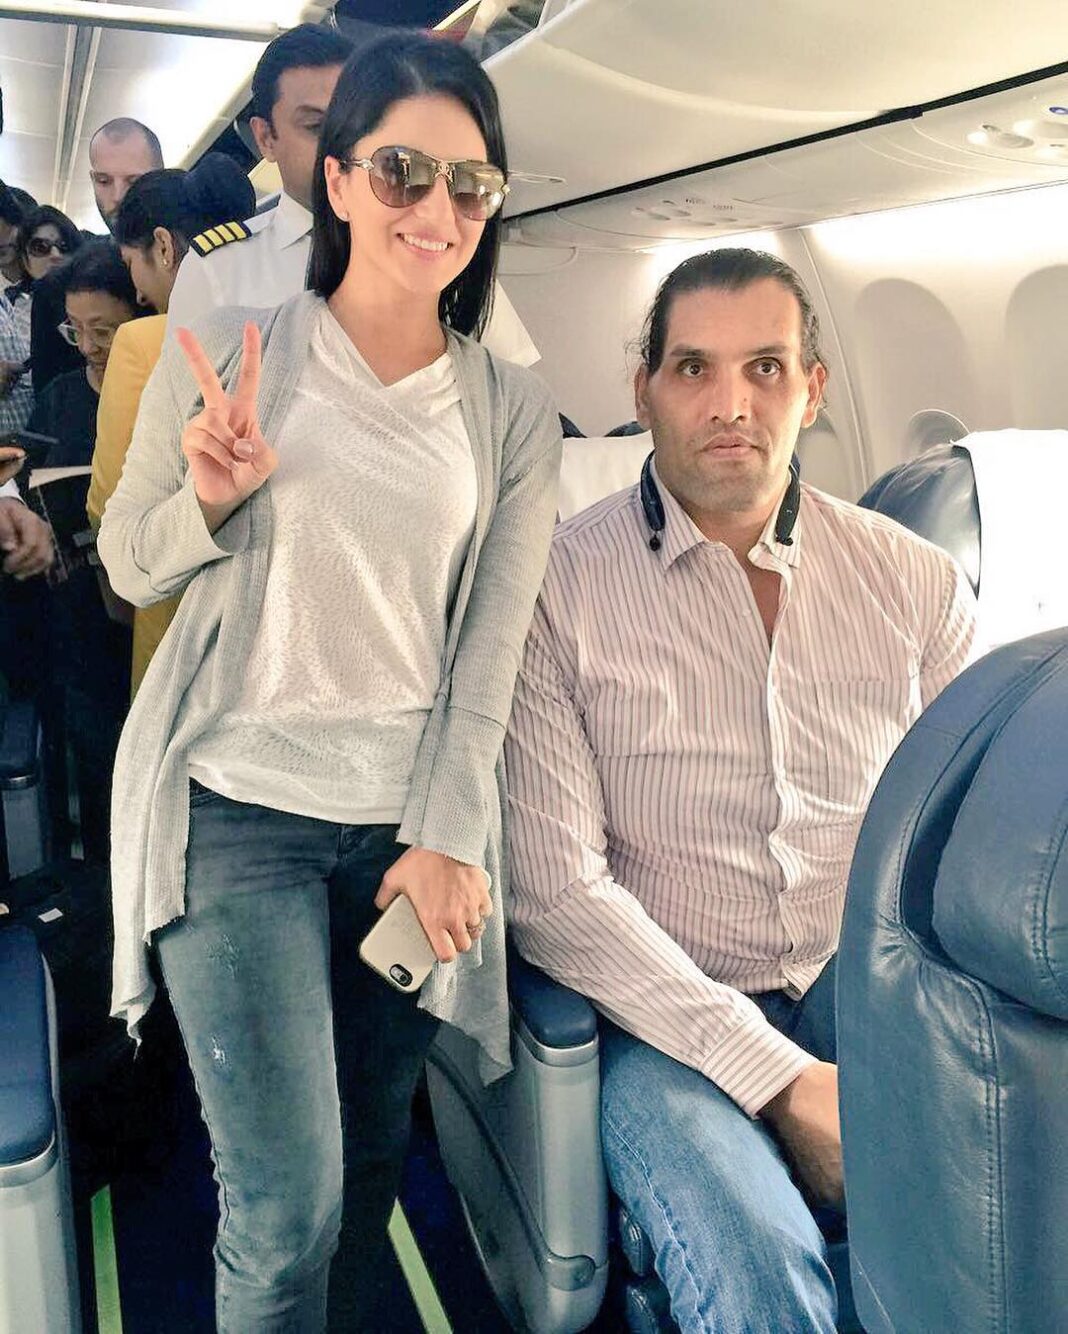 Sunny Leone Instagram - Oh yeah!! WWE champ The Great Khali!! Childhood dream...going to go practice the Khali vice grip now!!